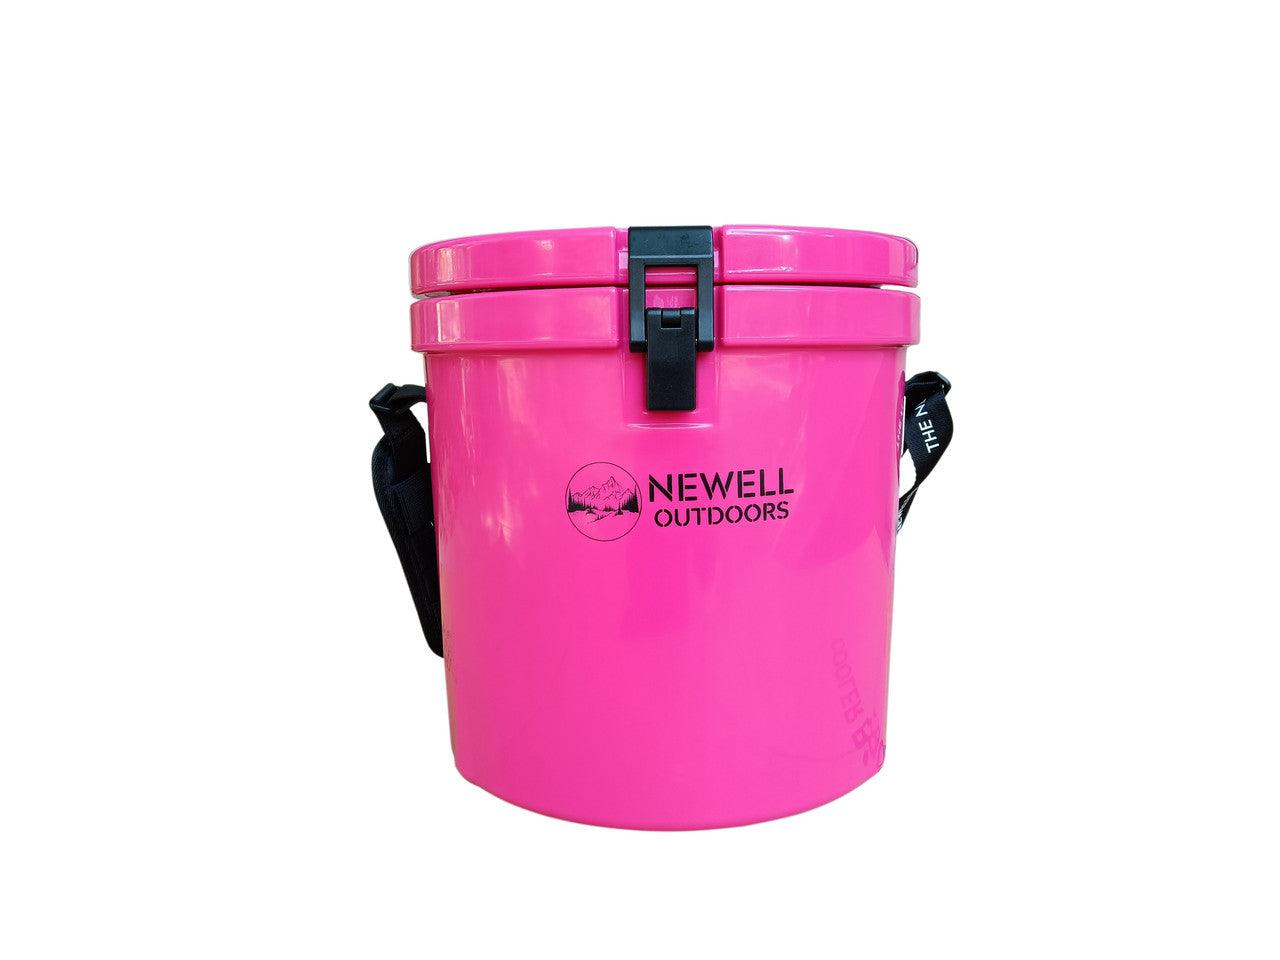 The Neweller Twelve in Hot Pink with a Strap